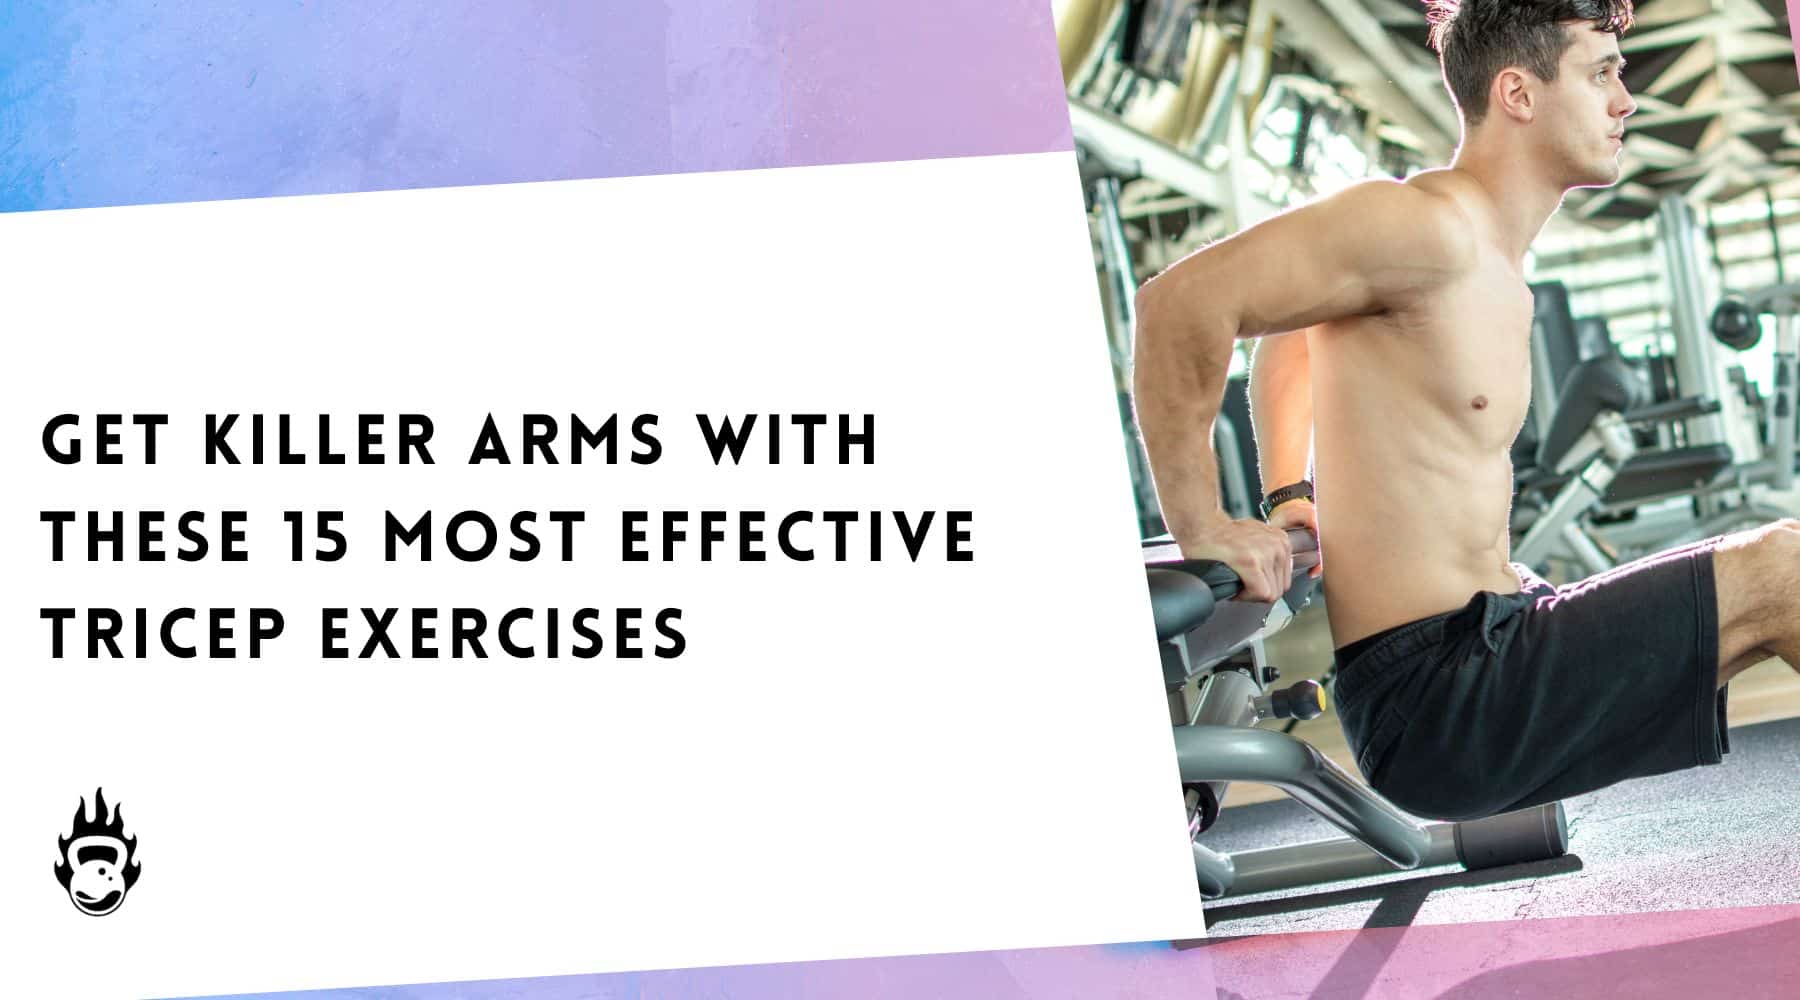 Get Killer Arms with These 15 Most Effective Tricep Exercises